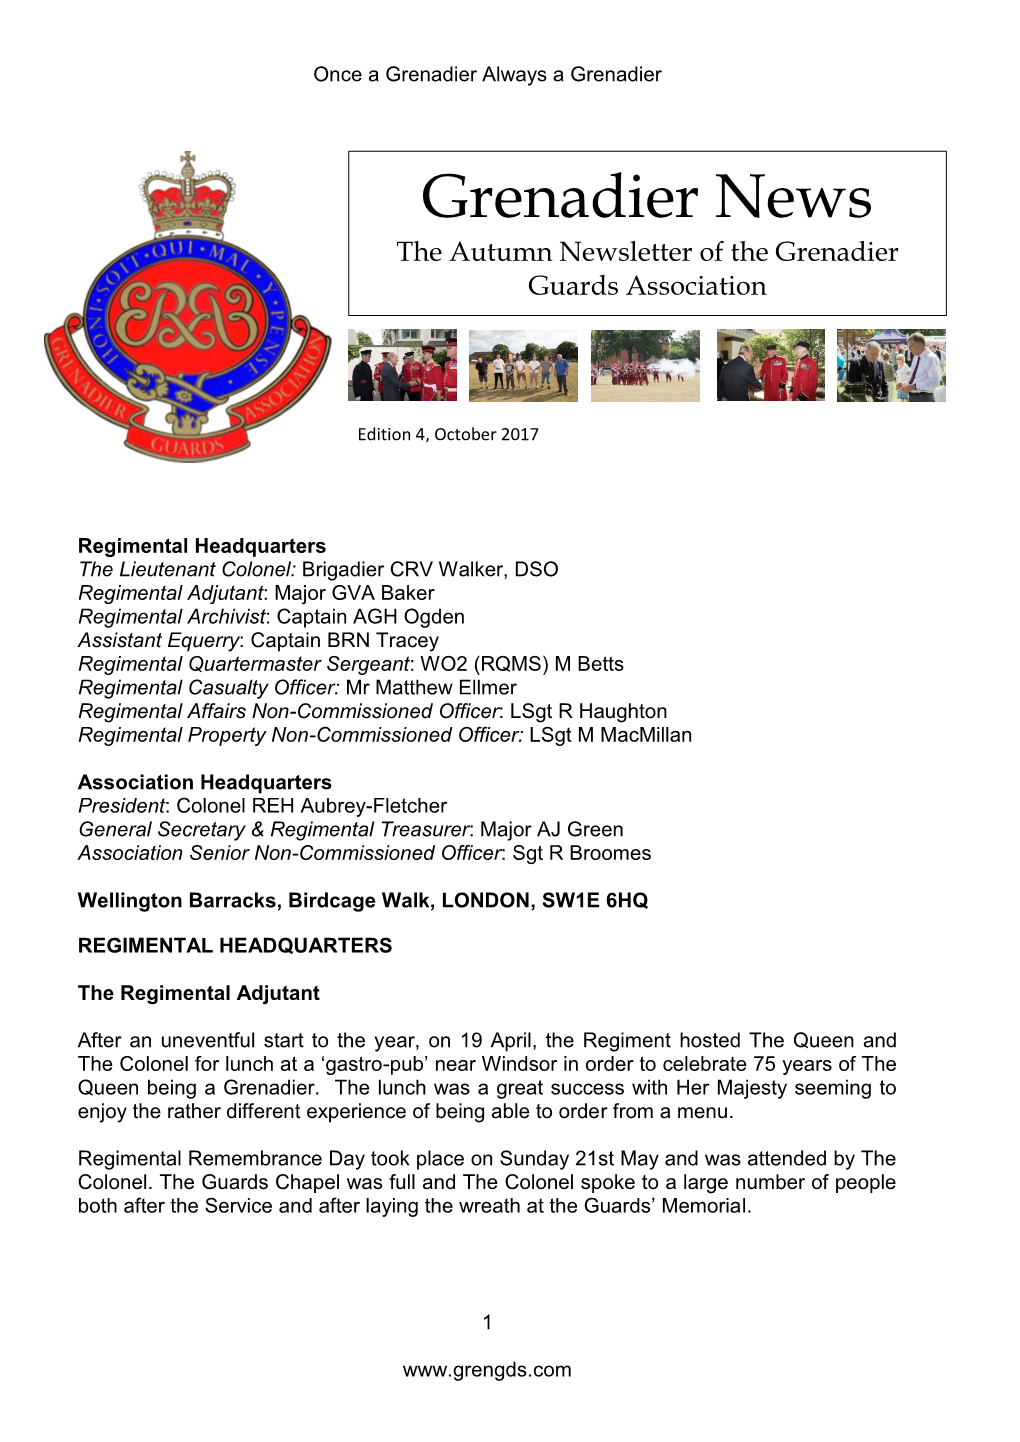 Grenadier News the Autumn Newsletter of the Grenadier Guards Association